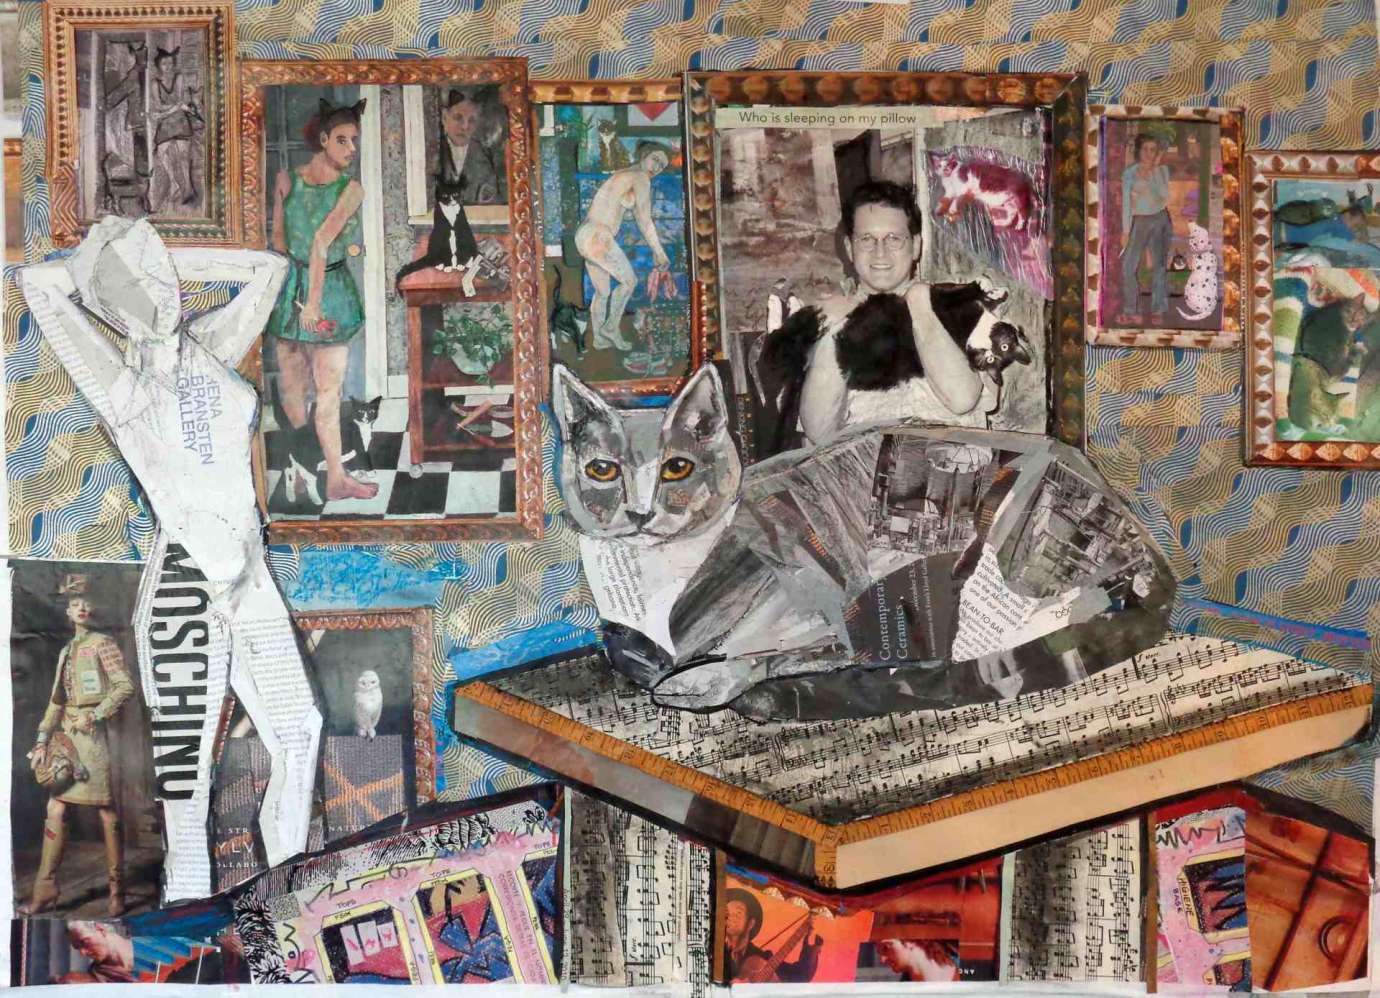 Famous paintings of figures in frames hang on a wall behind an all white figure posing, a person holding a cat, and a cat sitting on a table